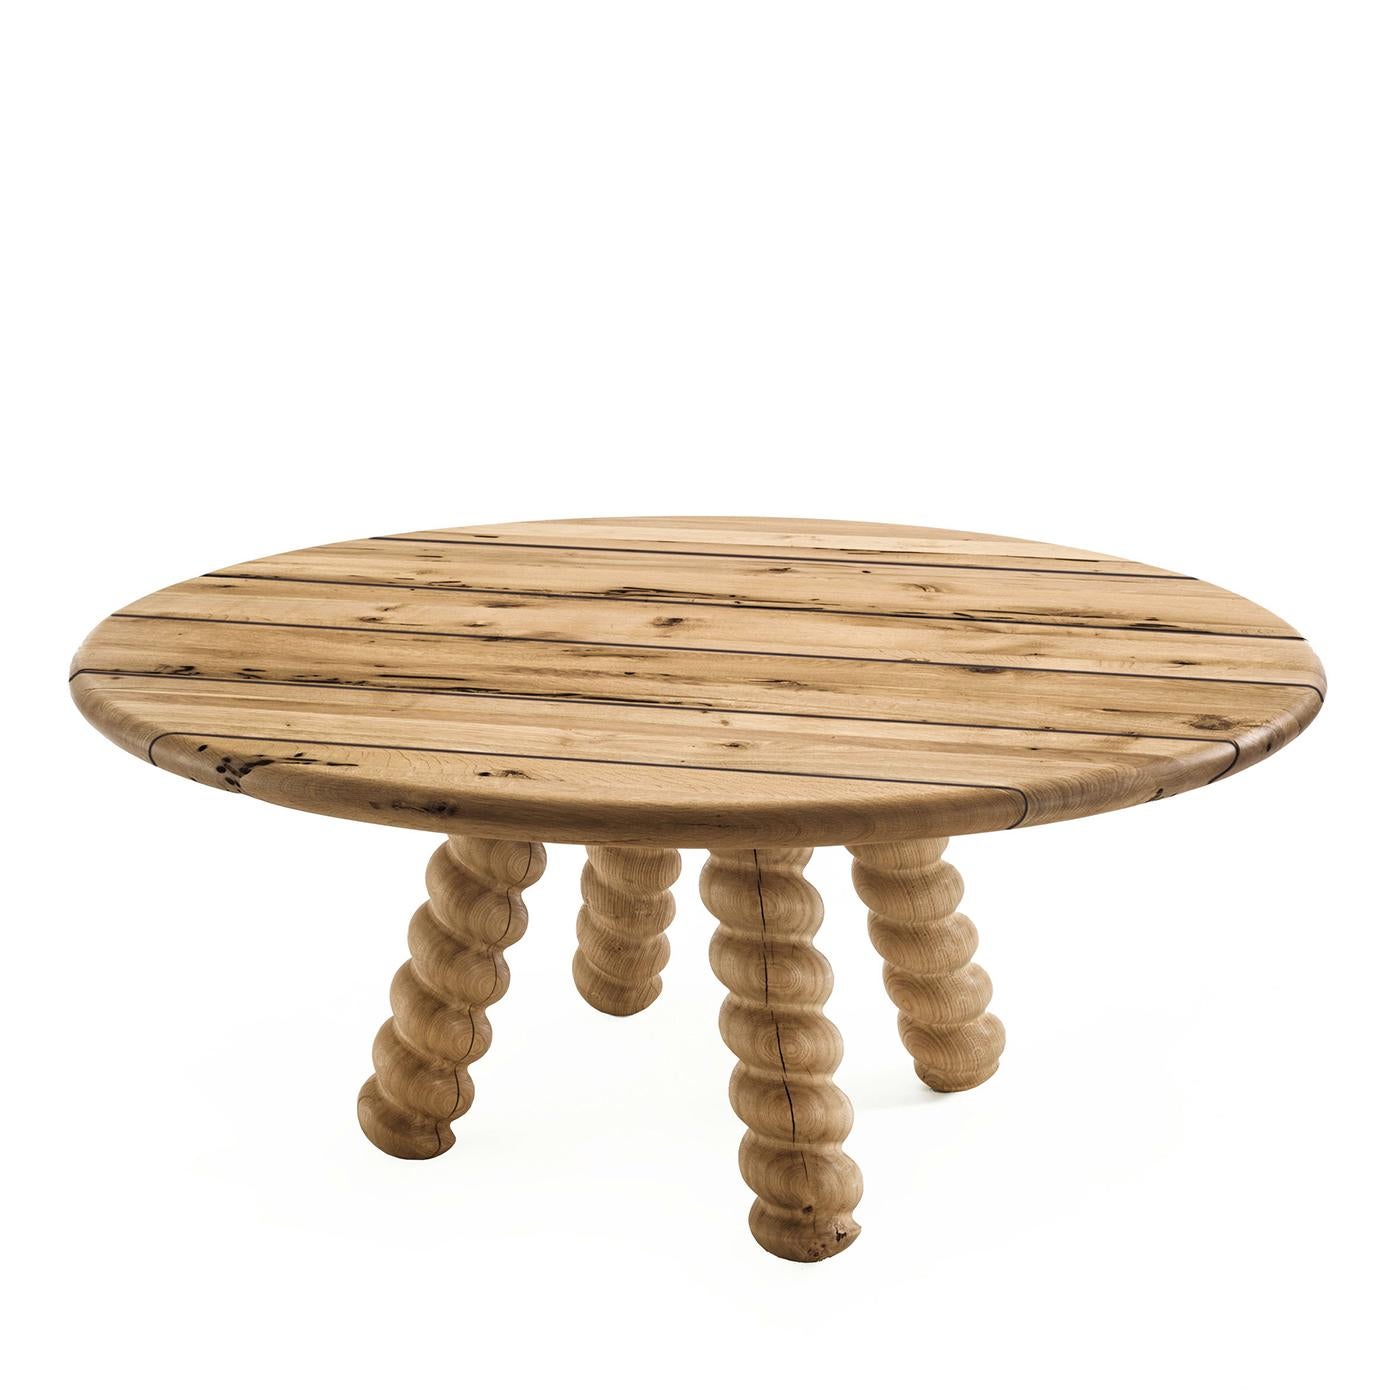 Dining table spirale with all structure
in solid raw oak. Table top made with solid
raw oak slats.
Diameter 200xH75cm, price: 18900,00€.
Also available in:
Diameter 180xH75cm, price: 16900,00€.
Diameter 160xH75cm, price: 14500,00€.
 